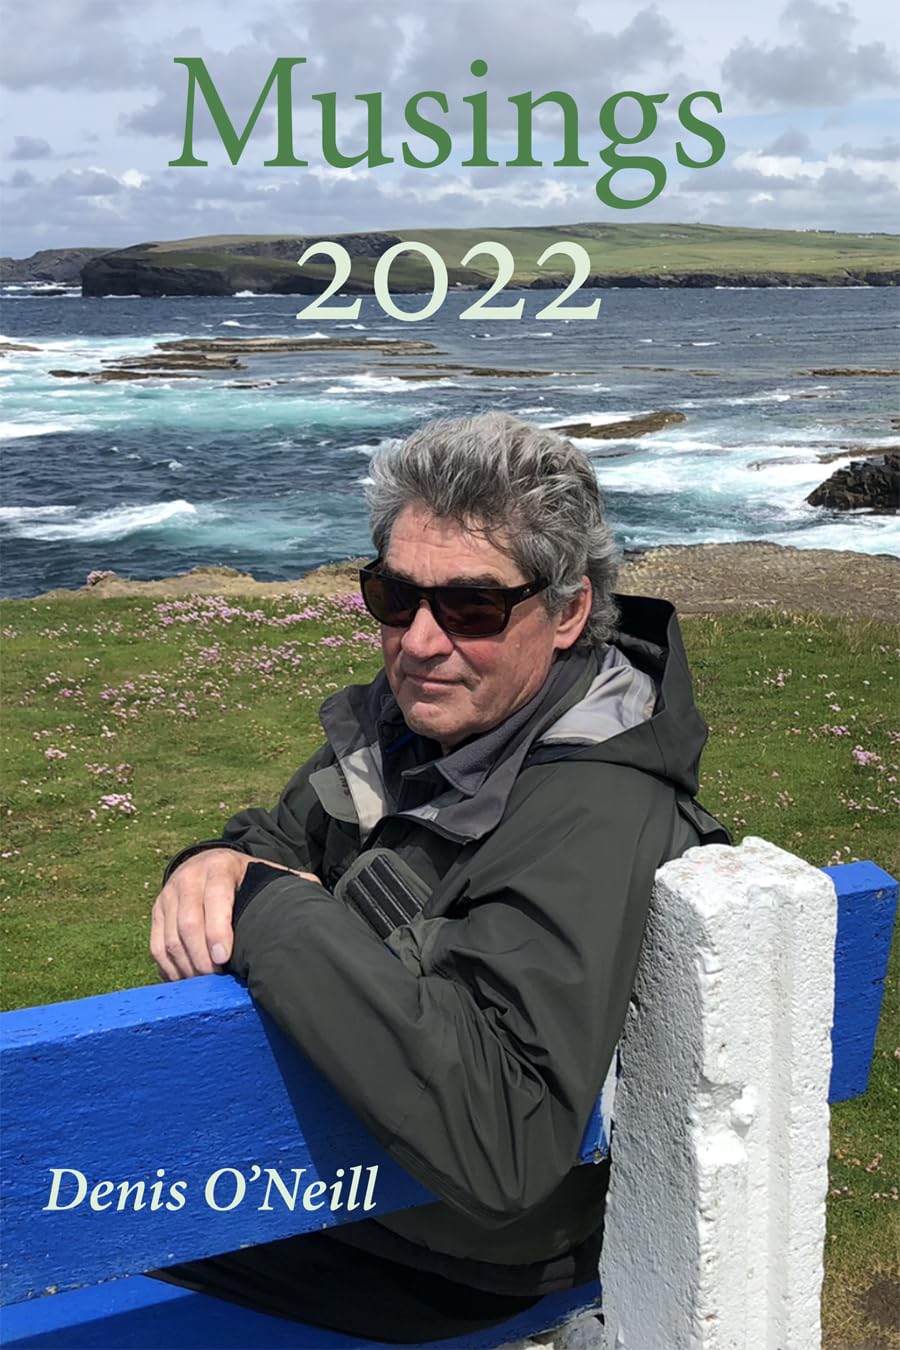 Musings 2022 by Denis O’Neill